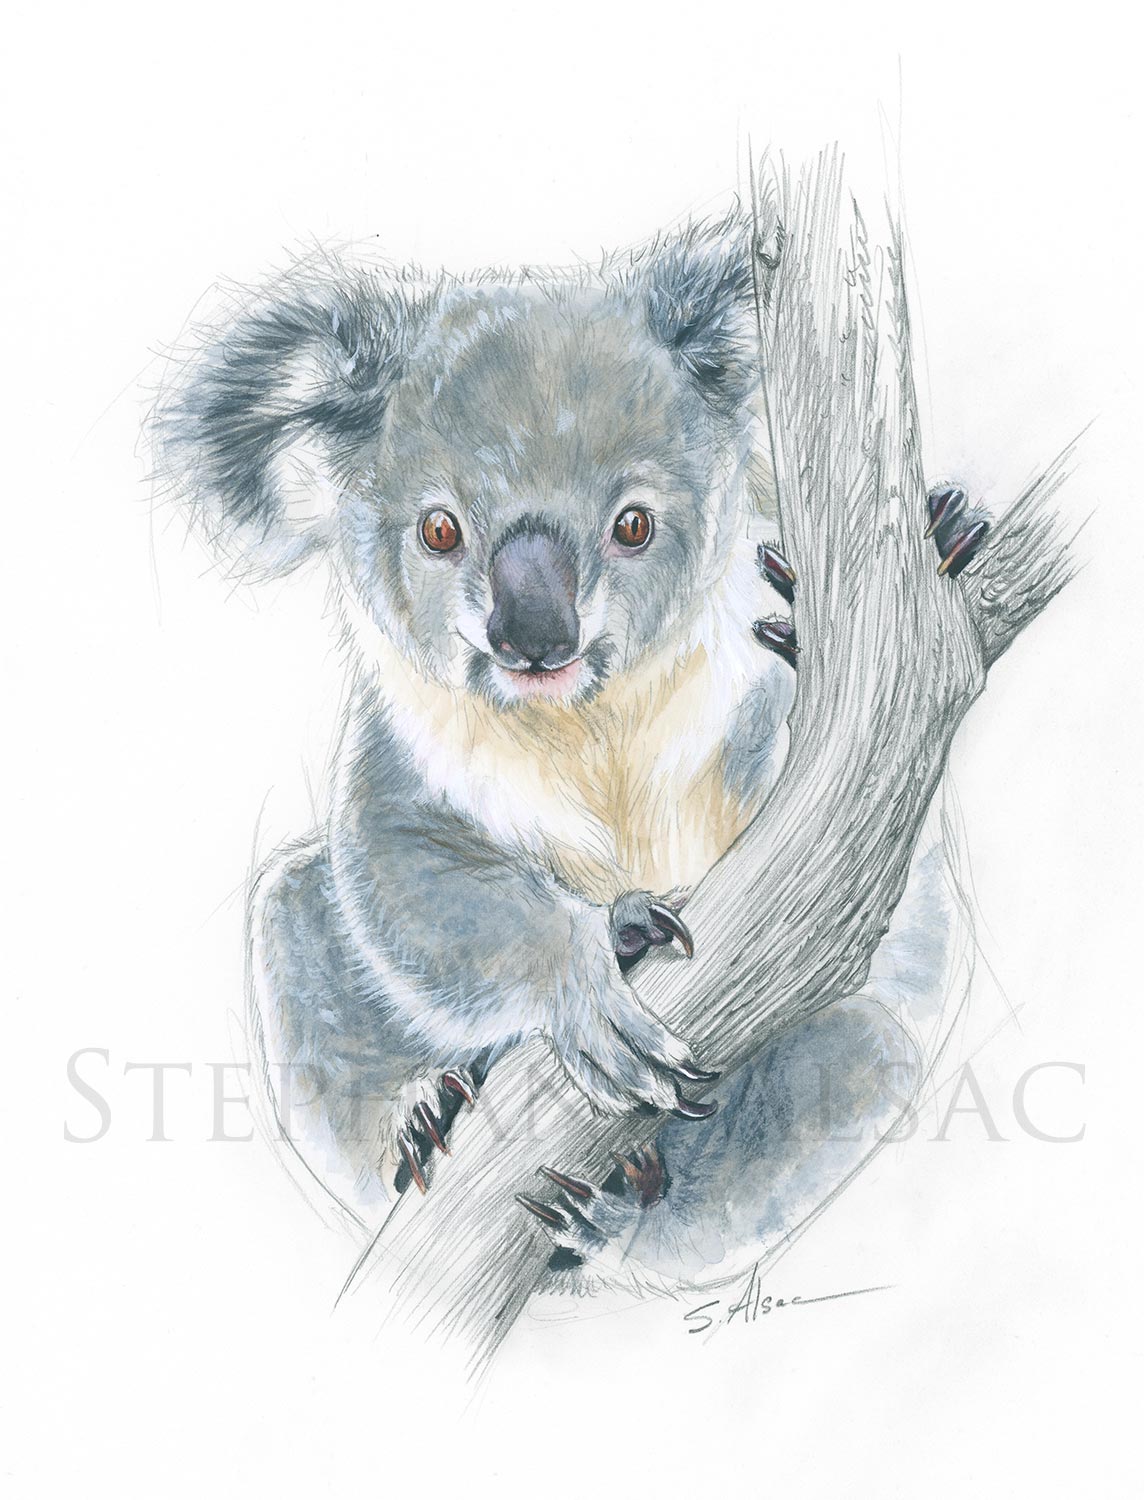 Koala Kid  watercolor drawing by Stephan Alsac - French Wildlife